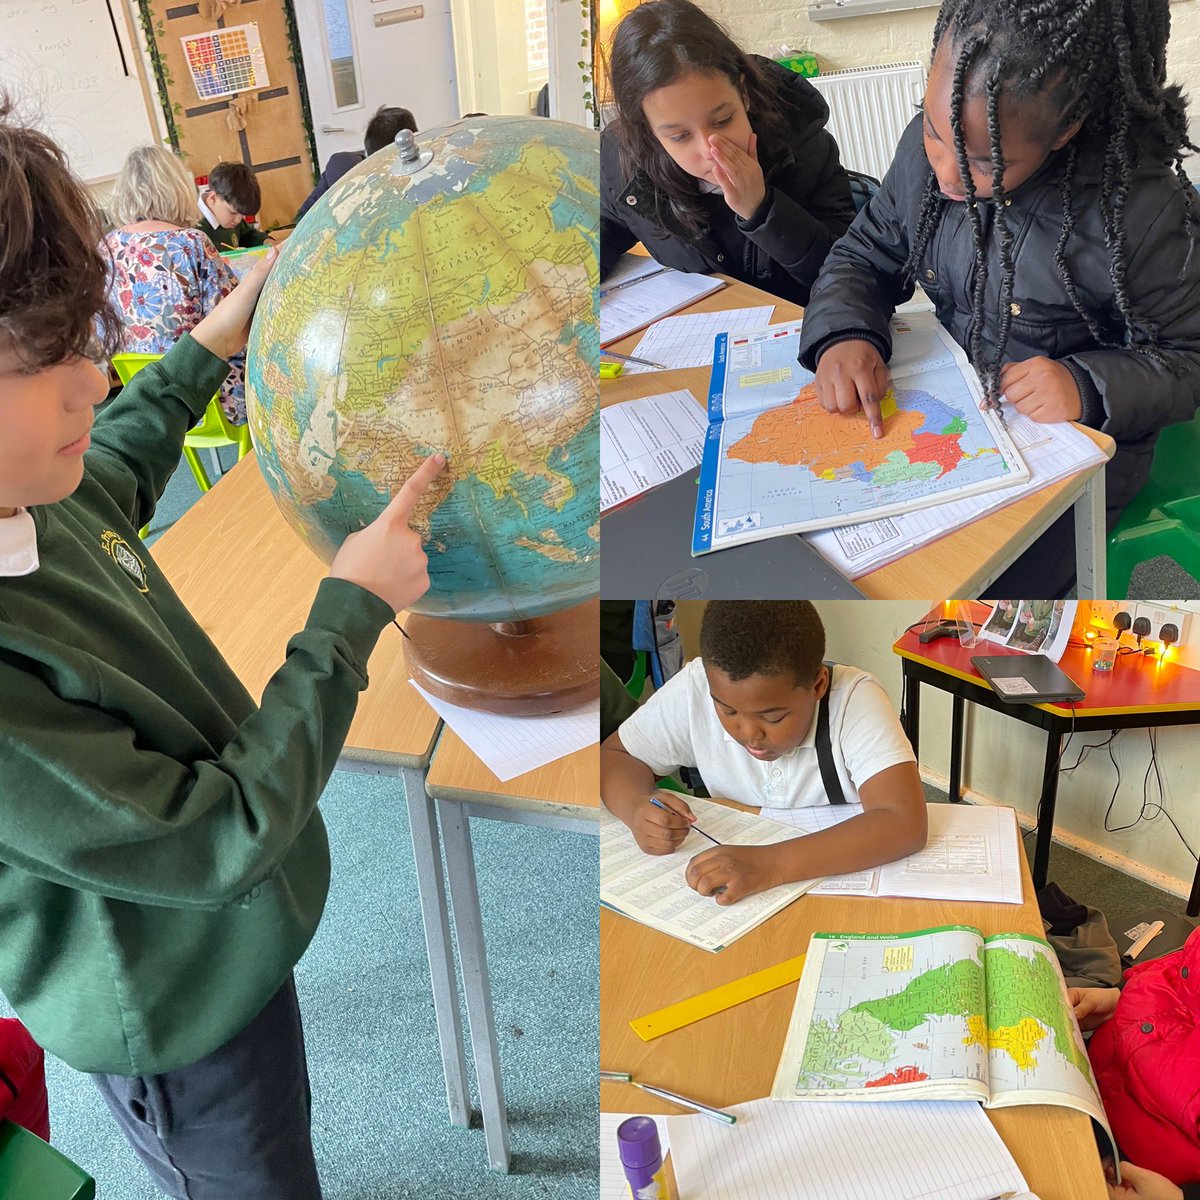 Sycamore class using their map skills; locating the world’s rivers and mountains @The_GA #Geography #geographyteacher #natgeo #ourplanetdaily #amazingearth